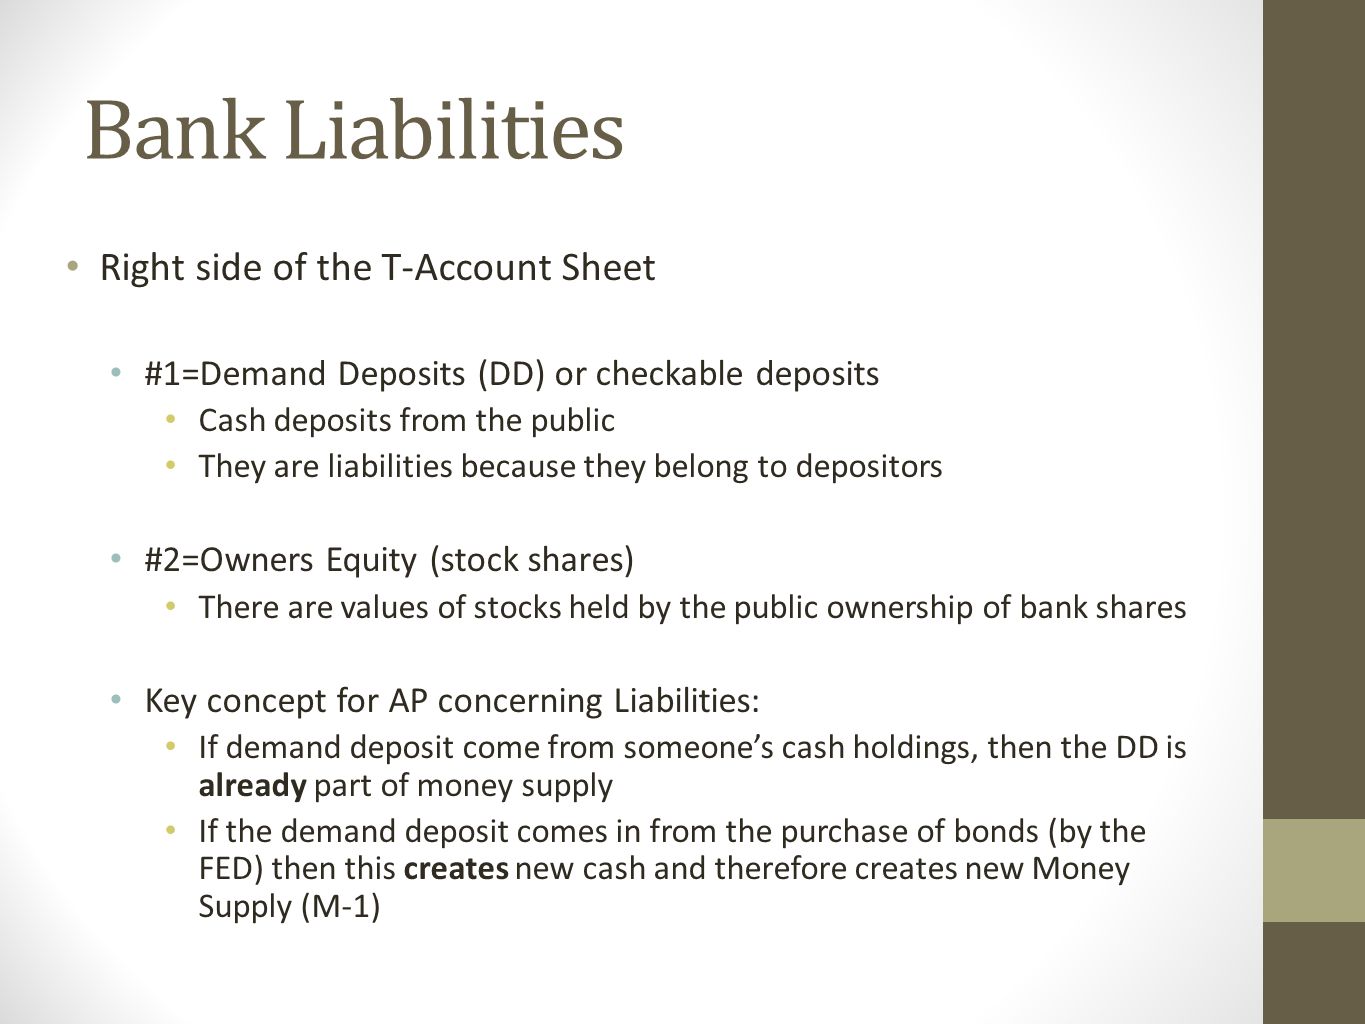 Bank Liabilities Right side of the T-Account Sheet